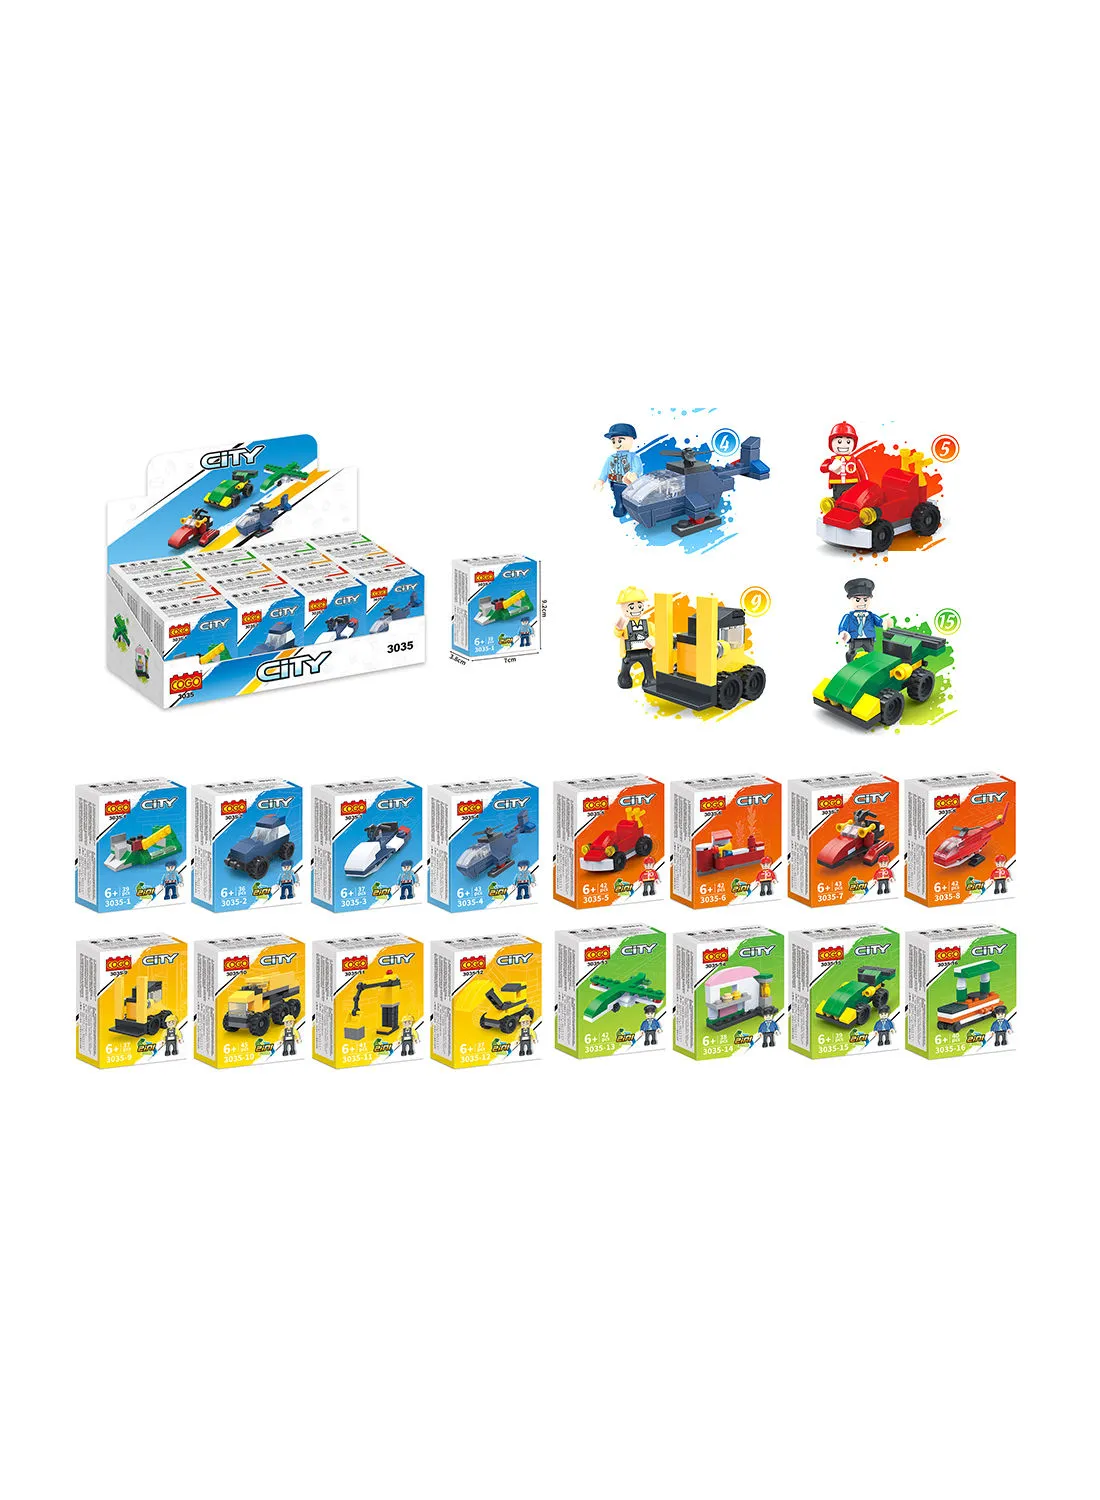 COGO 3035 16-Piece City Series Multicolour Non-Toxic ABS Building Blocks Box Set For Kids, 6+ Years